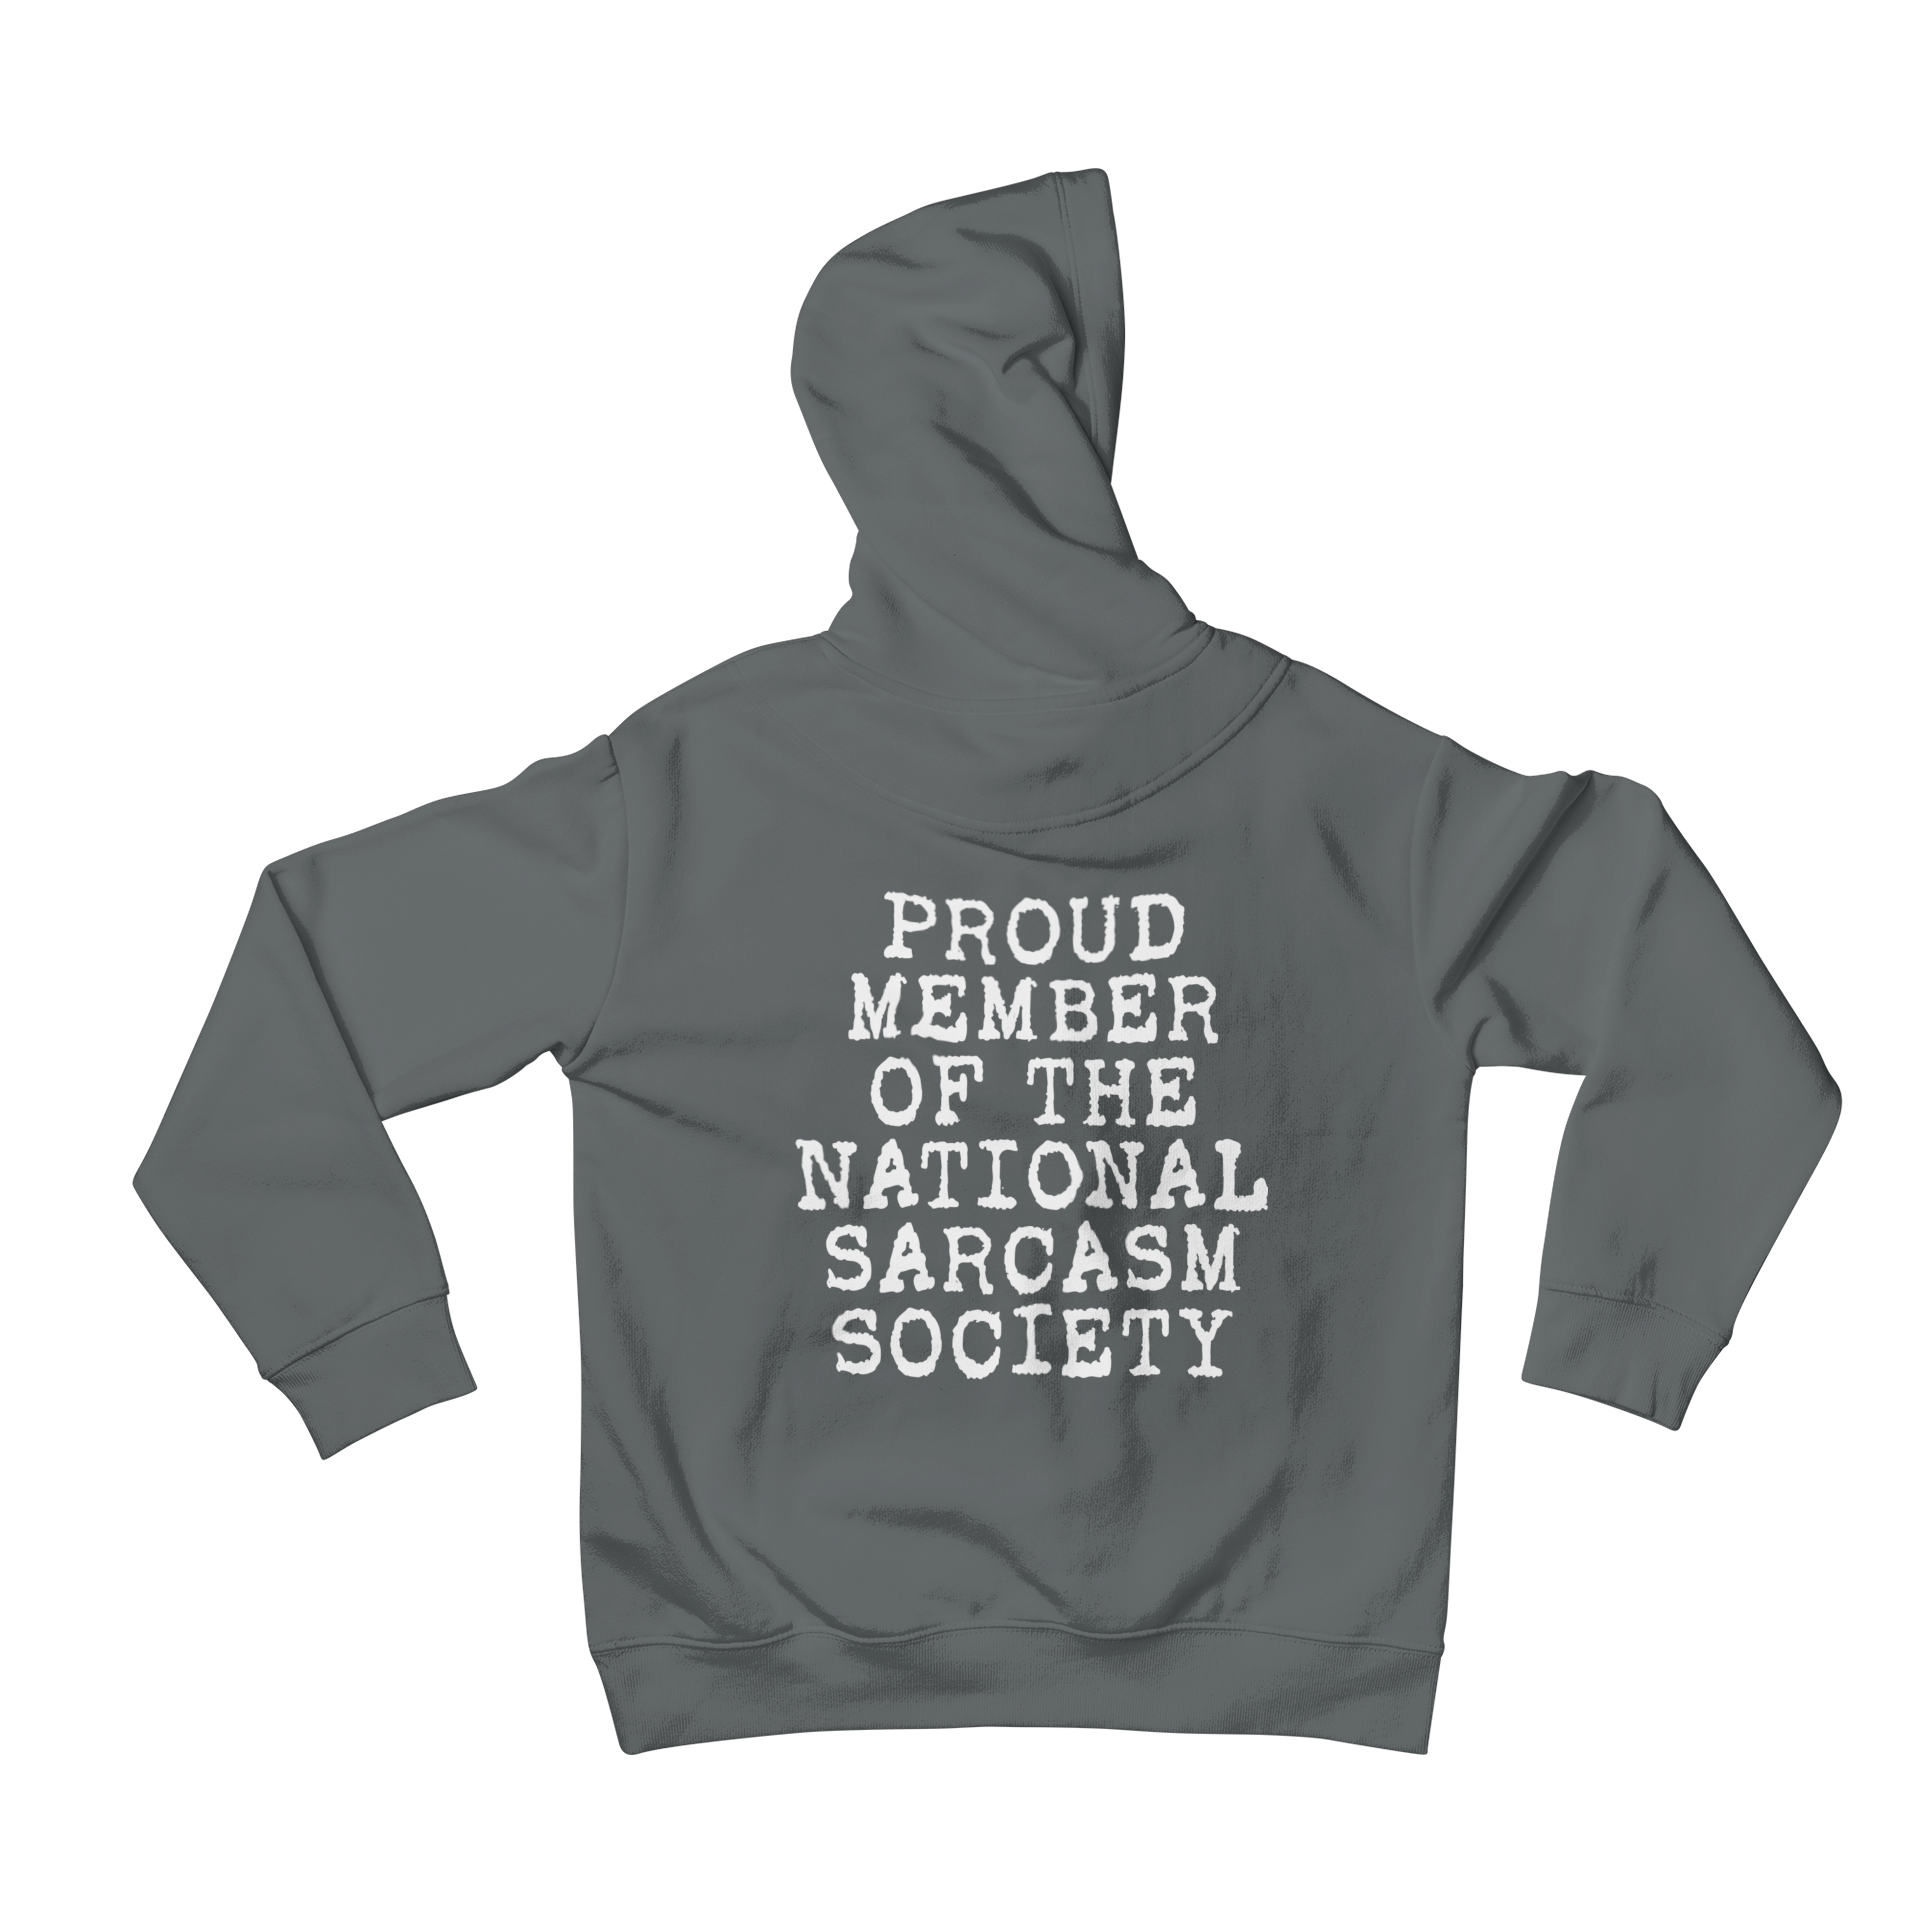 Join the national sarcasm society with this back print slogan hoodie! Proudly display your membership with this quirky and playful piece. Stay warm and show off your fun side at the same time. (Limited time offer: free eye rolls with purchase!)